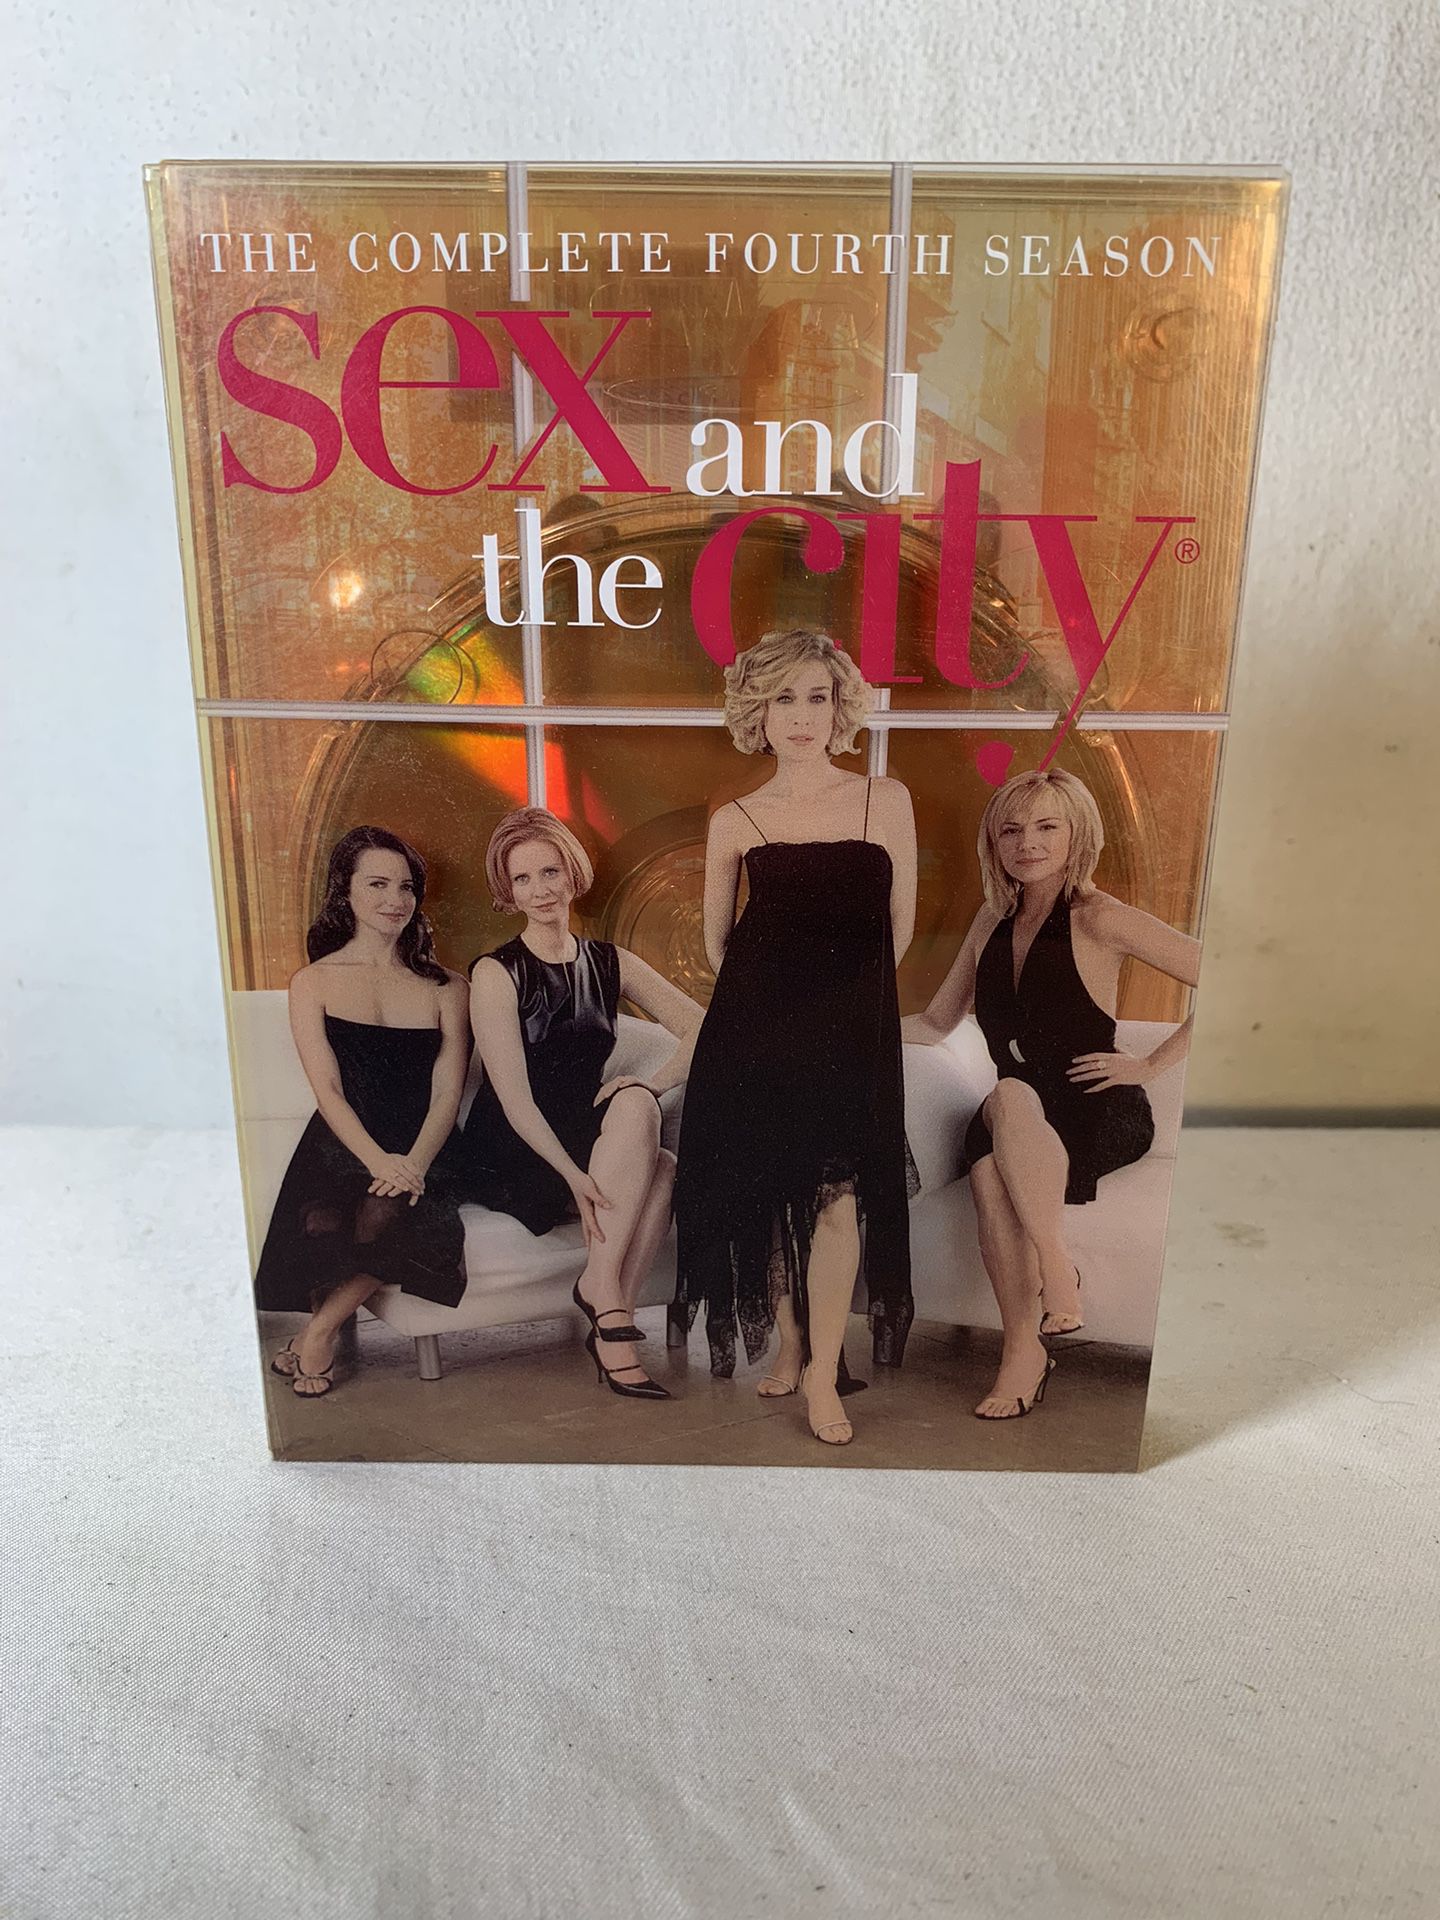 Sex and the City: The Complete Fourth Season (DVD, 2003, 3-Disc Set)